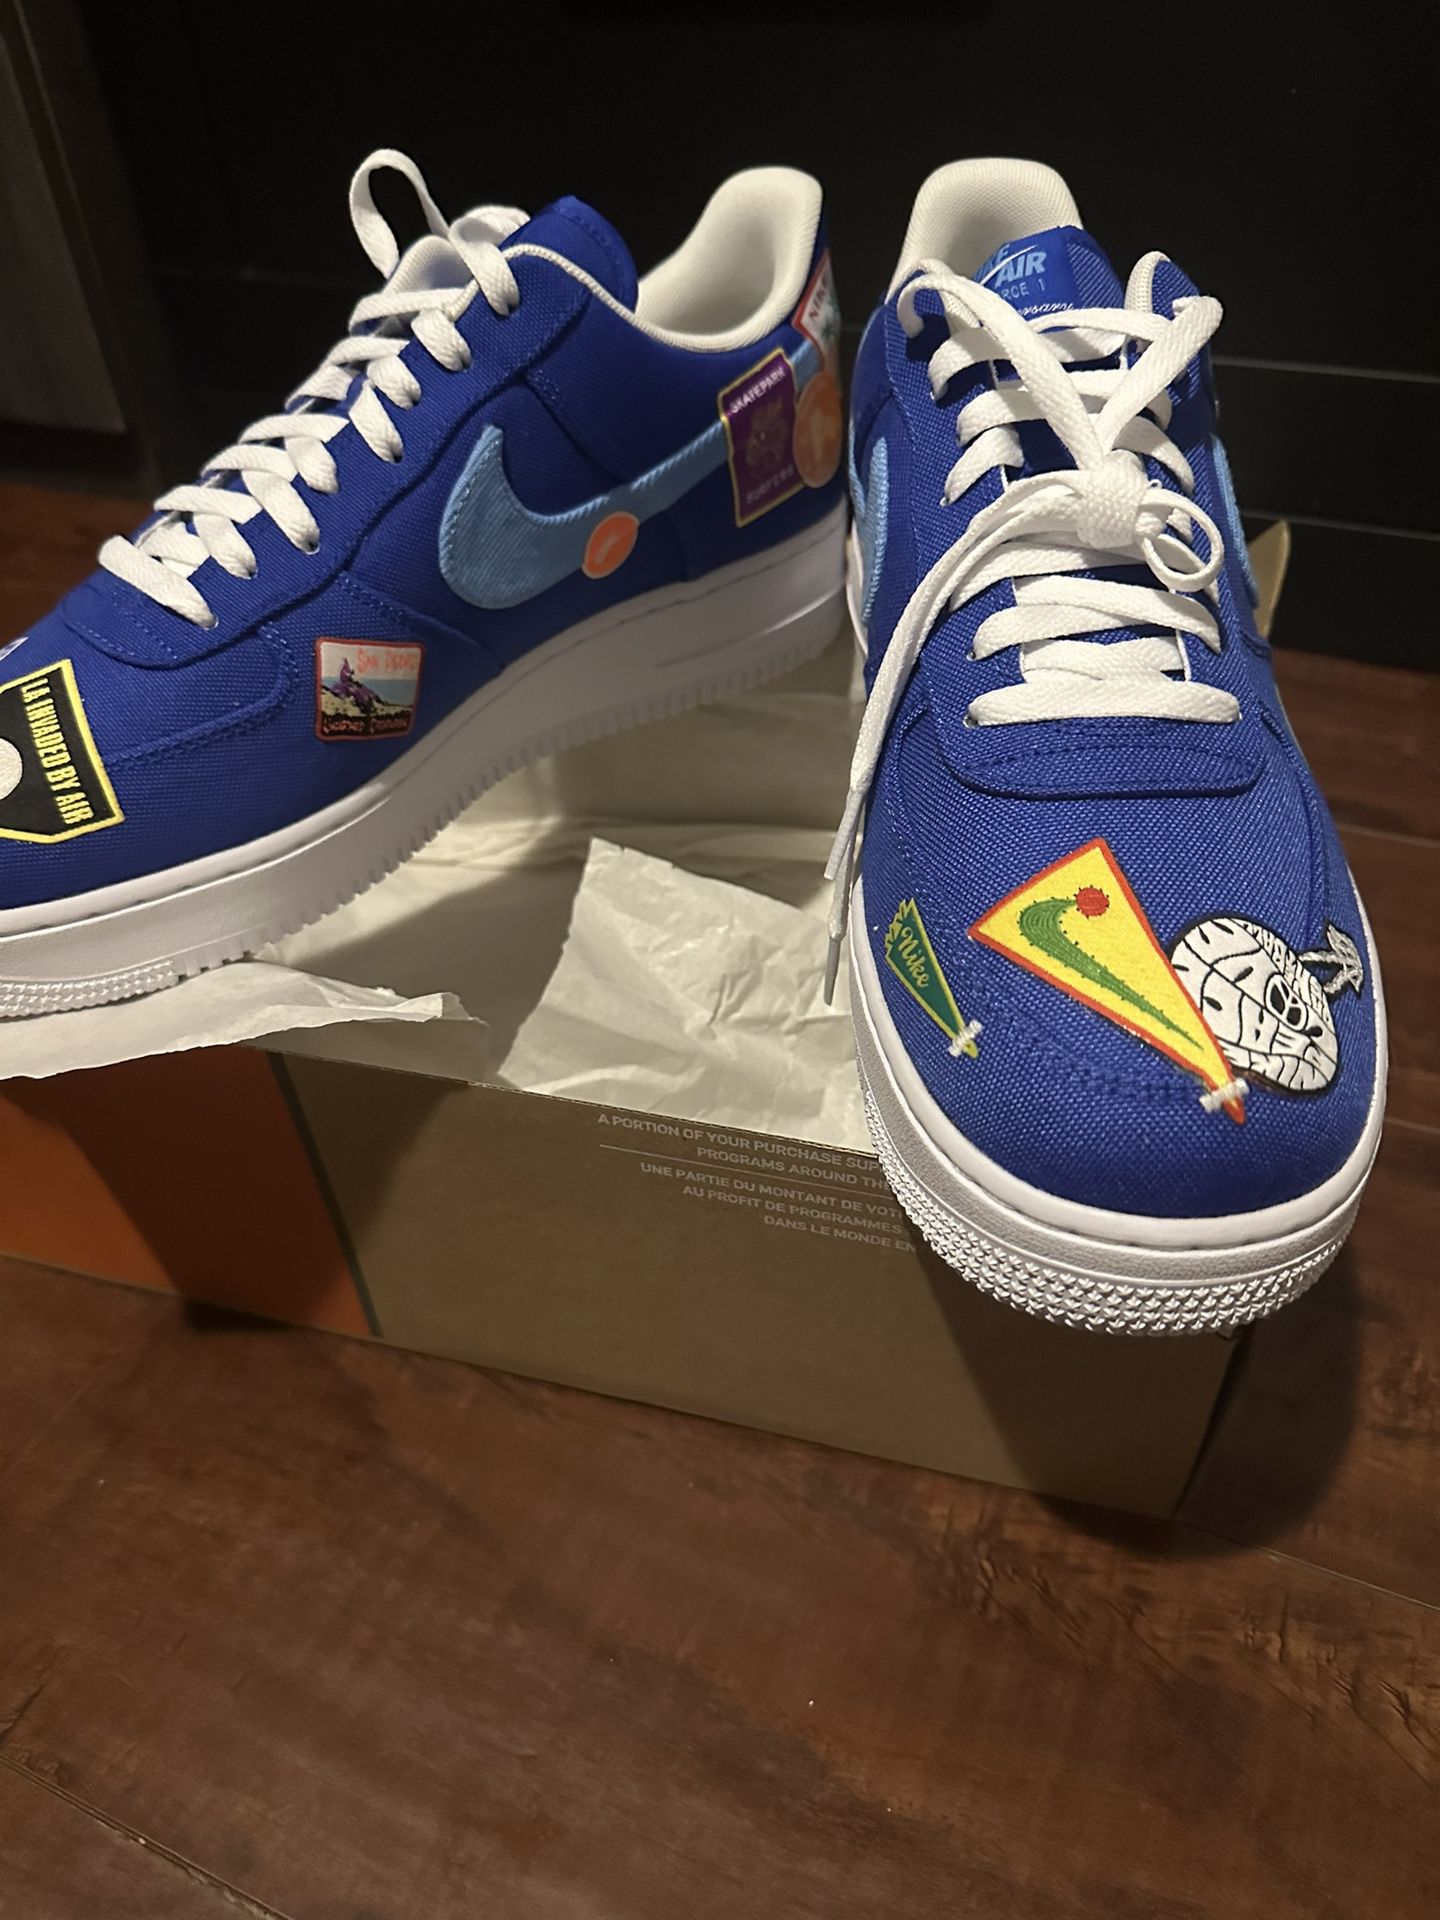 Nike Air Force 1 “What The LA” for Sale in La Palma, CA - OfferUp